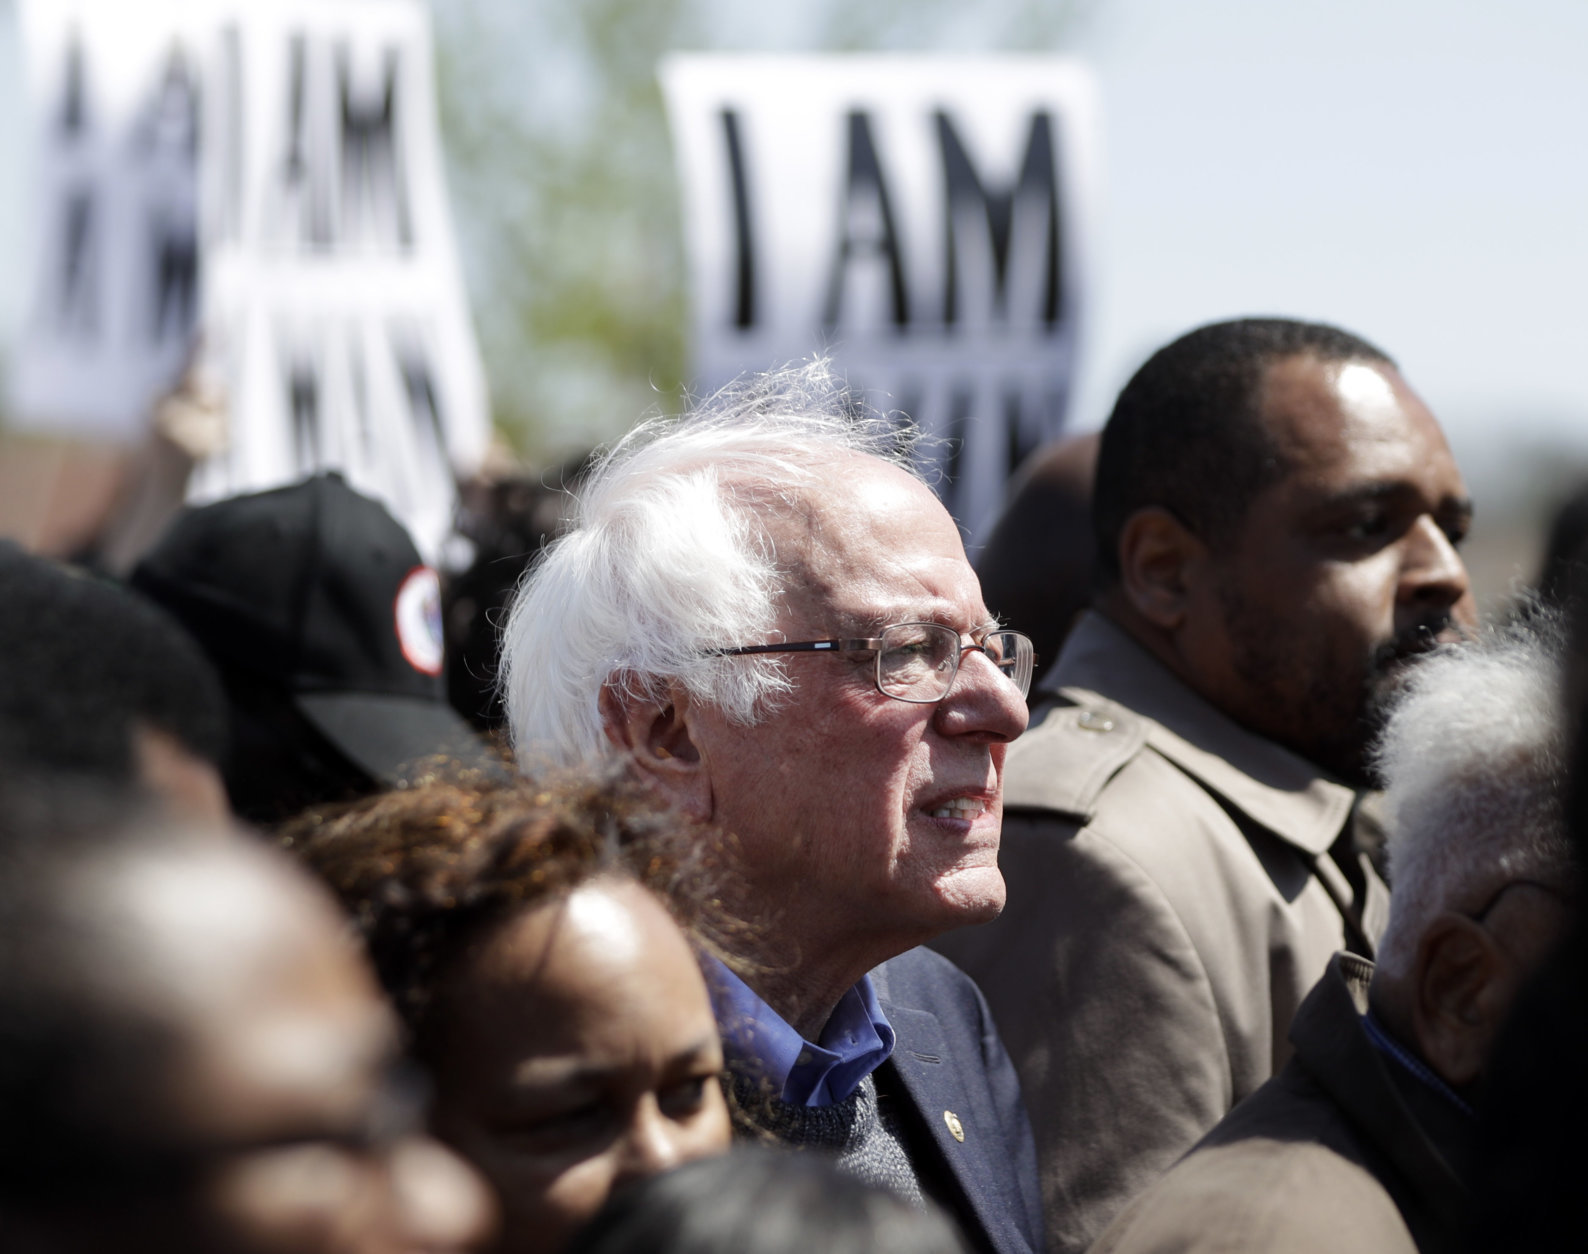 Sen. Bernie Sanders, I-Vt., takes part in a march commemorating the 50th anniversary of the assassination of Rev. Martin Luther King Jr. Wednesday, April 4, 2018, in Memphis, Tenn. King was assassinated April 4, 1968, while in Memphis supporting striking sanitation workers. (AP Photo/Mark Humphrey)